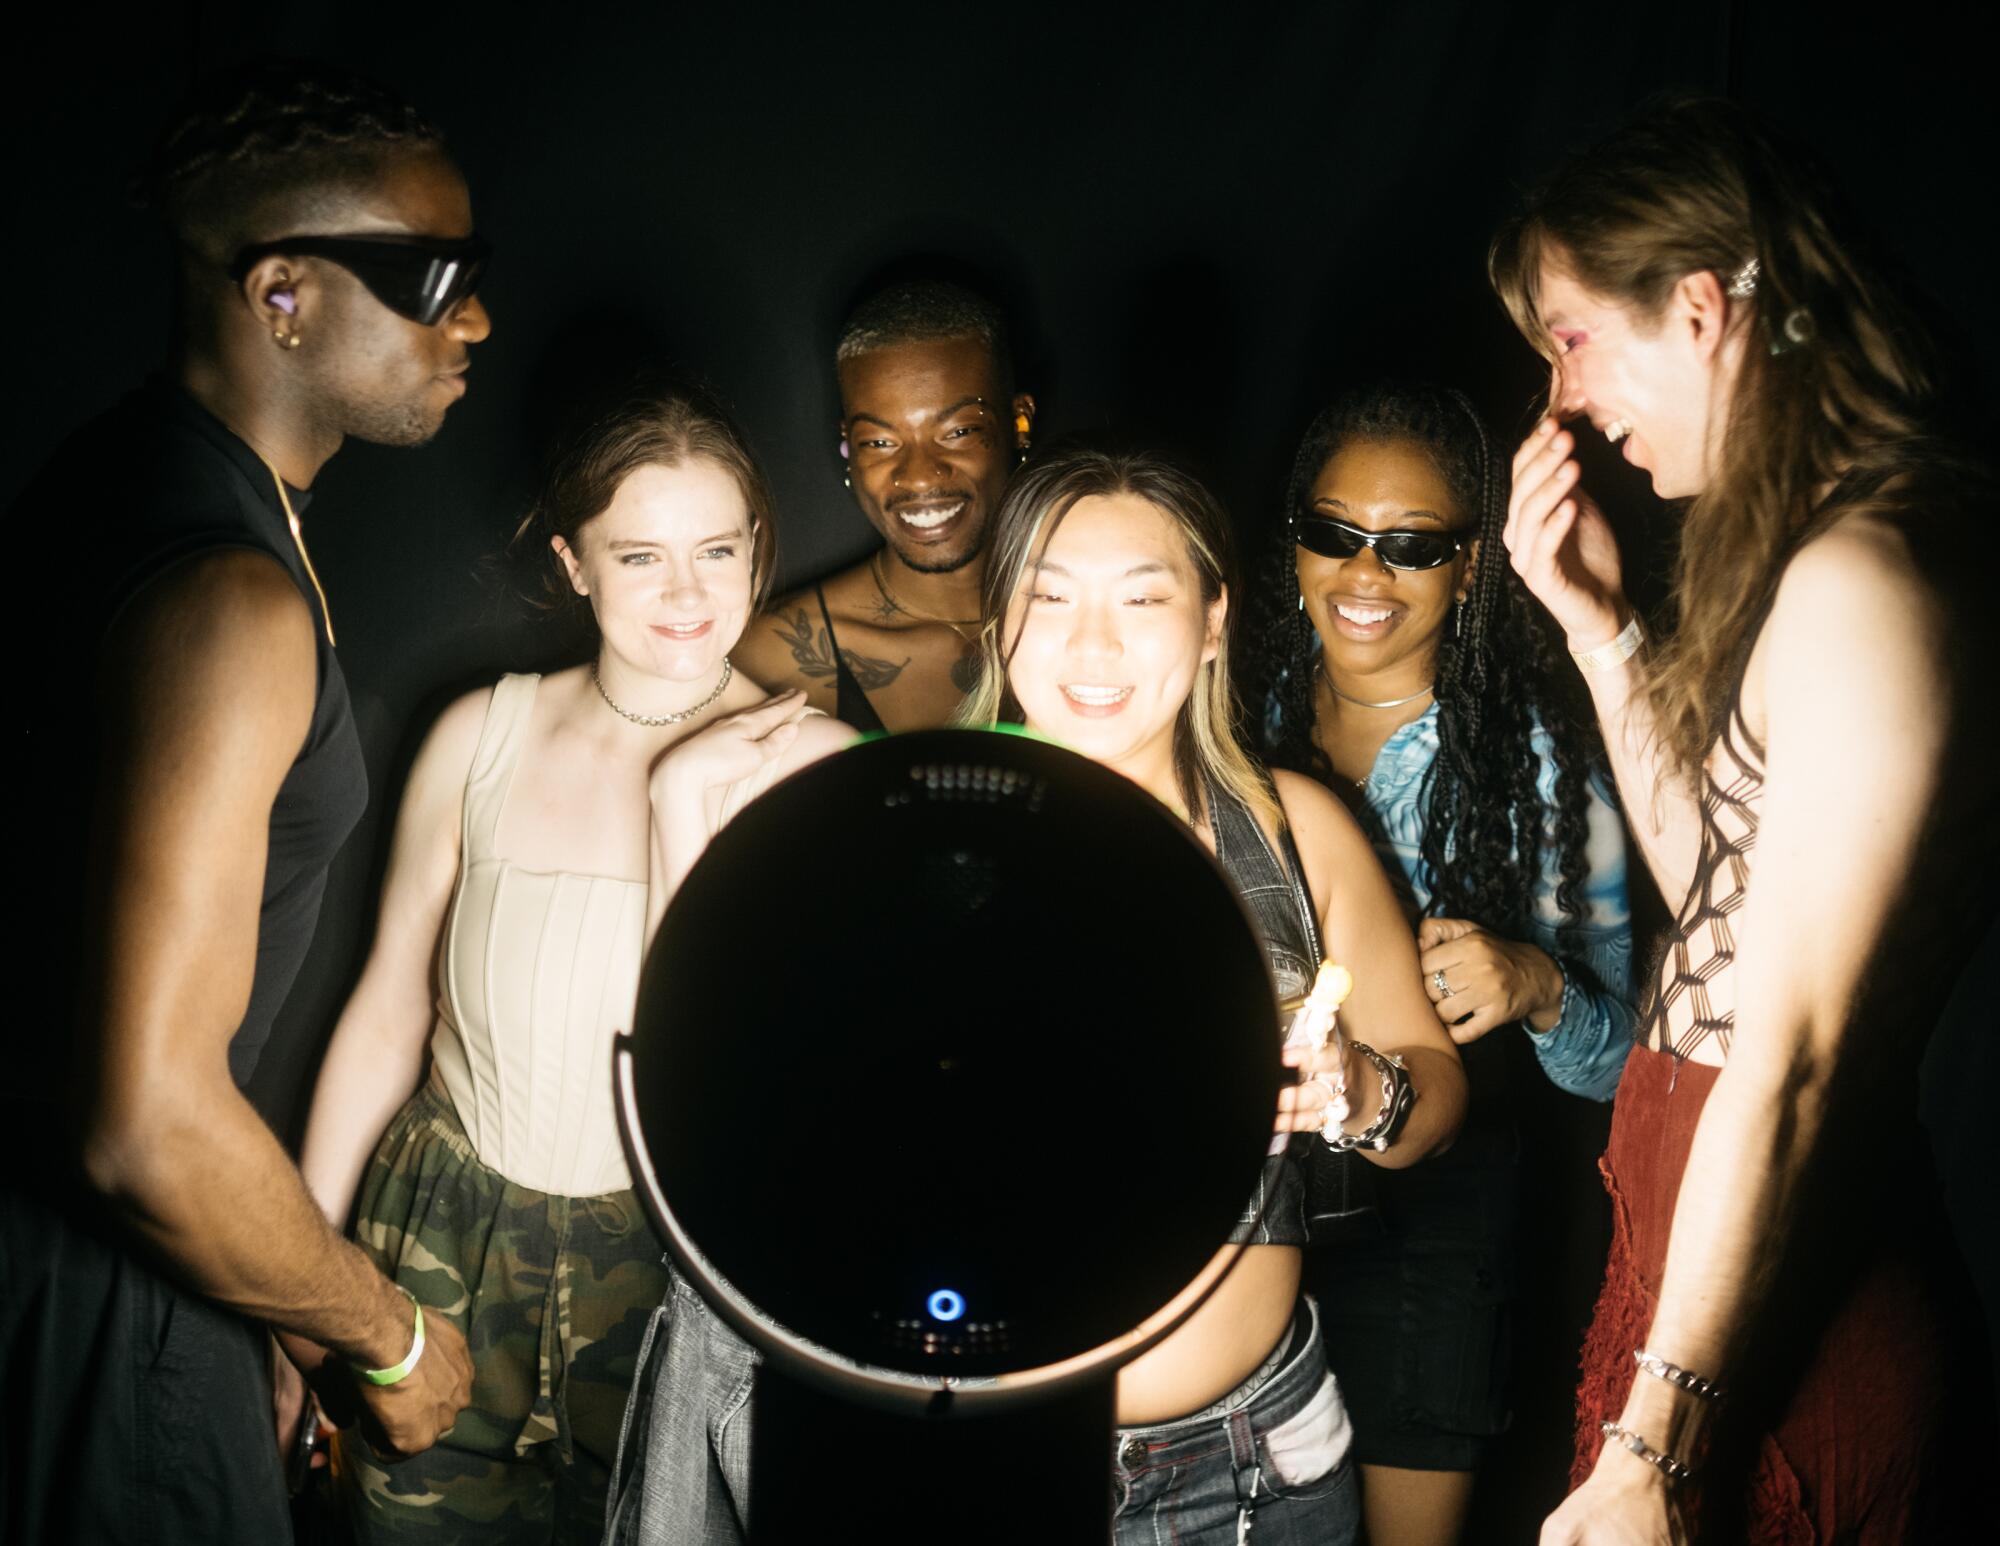 A group of people takes a group portrait in a photo booth.